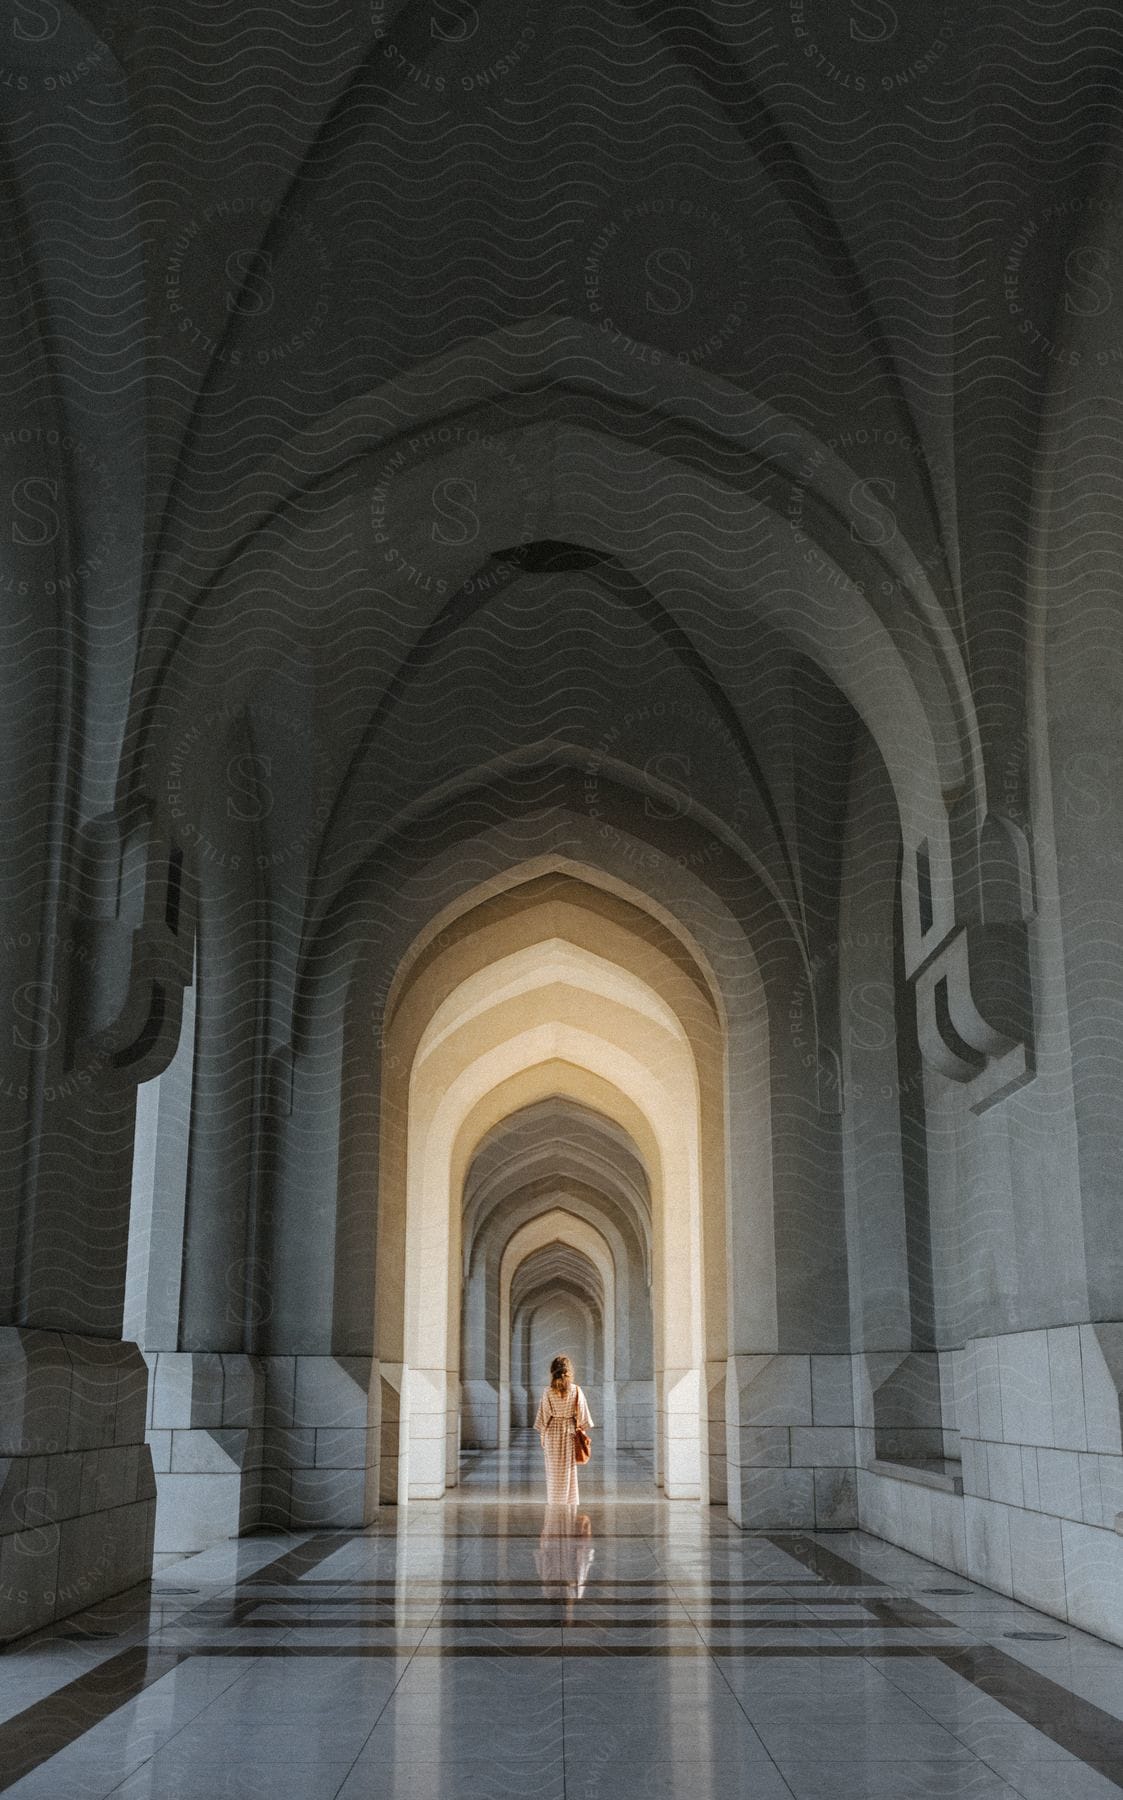 A woman walks down a hallway with tall gothic archways and a polished marble floor